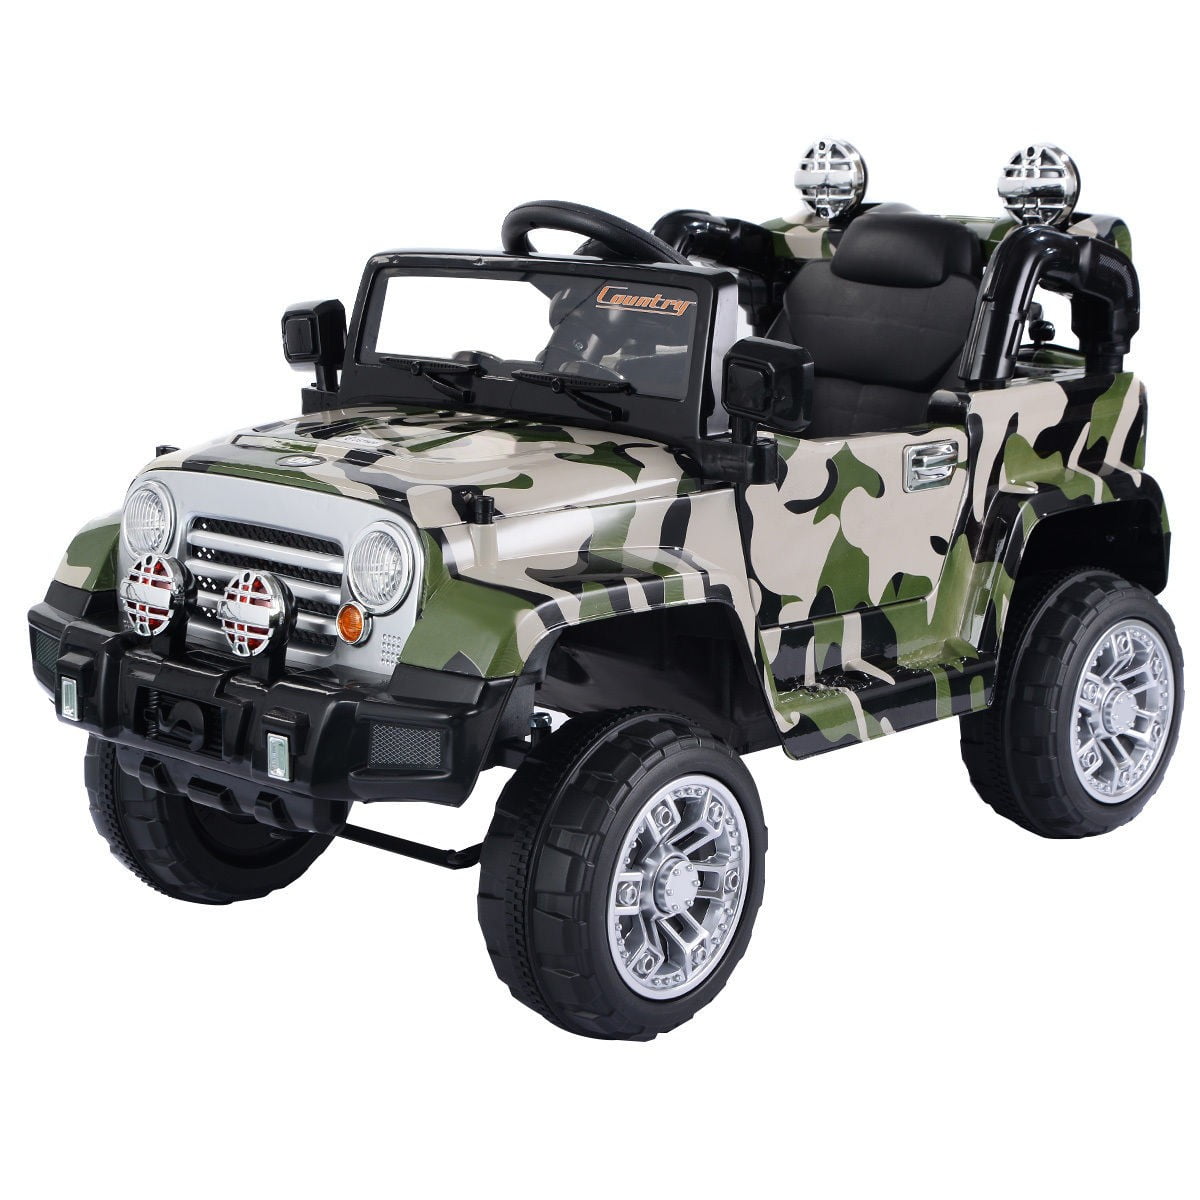 12V MP3 Kids Ride On Truck Jeep Car RC Remote Control w/ LED Lights Music